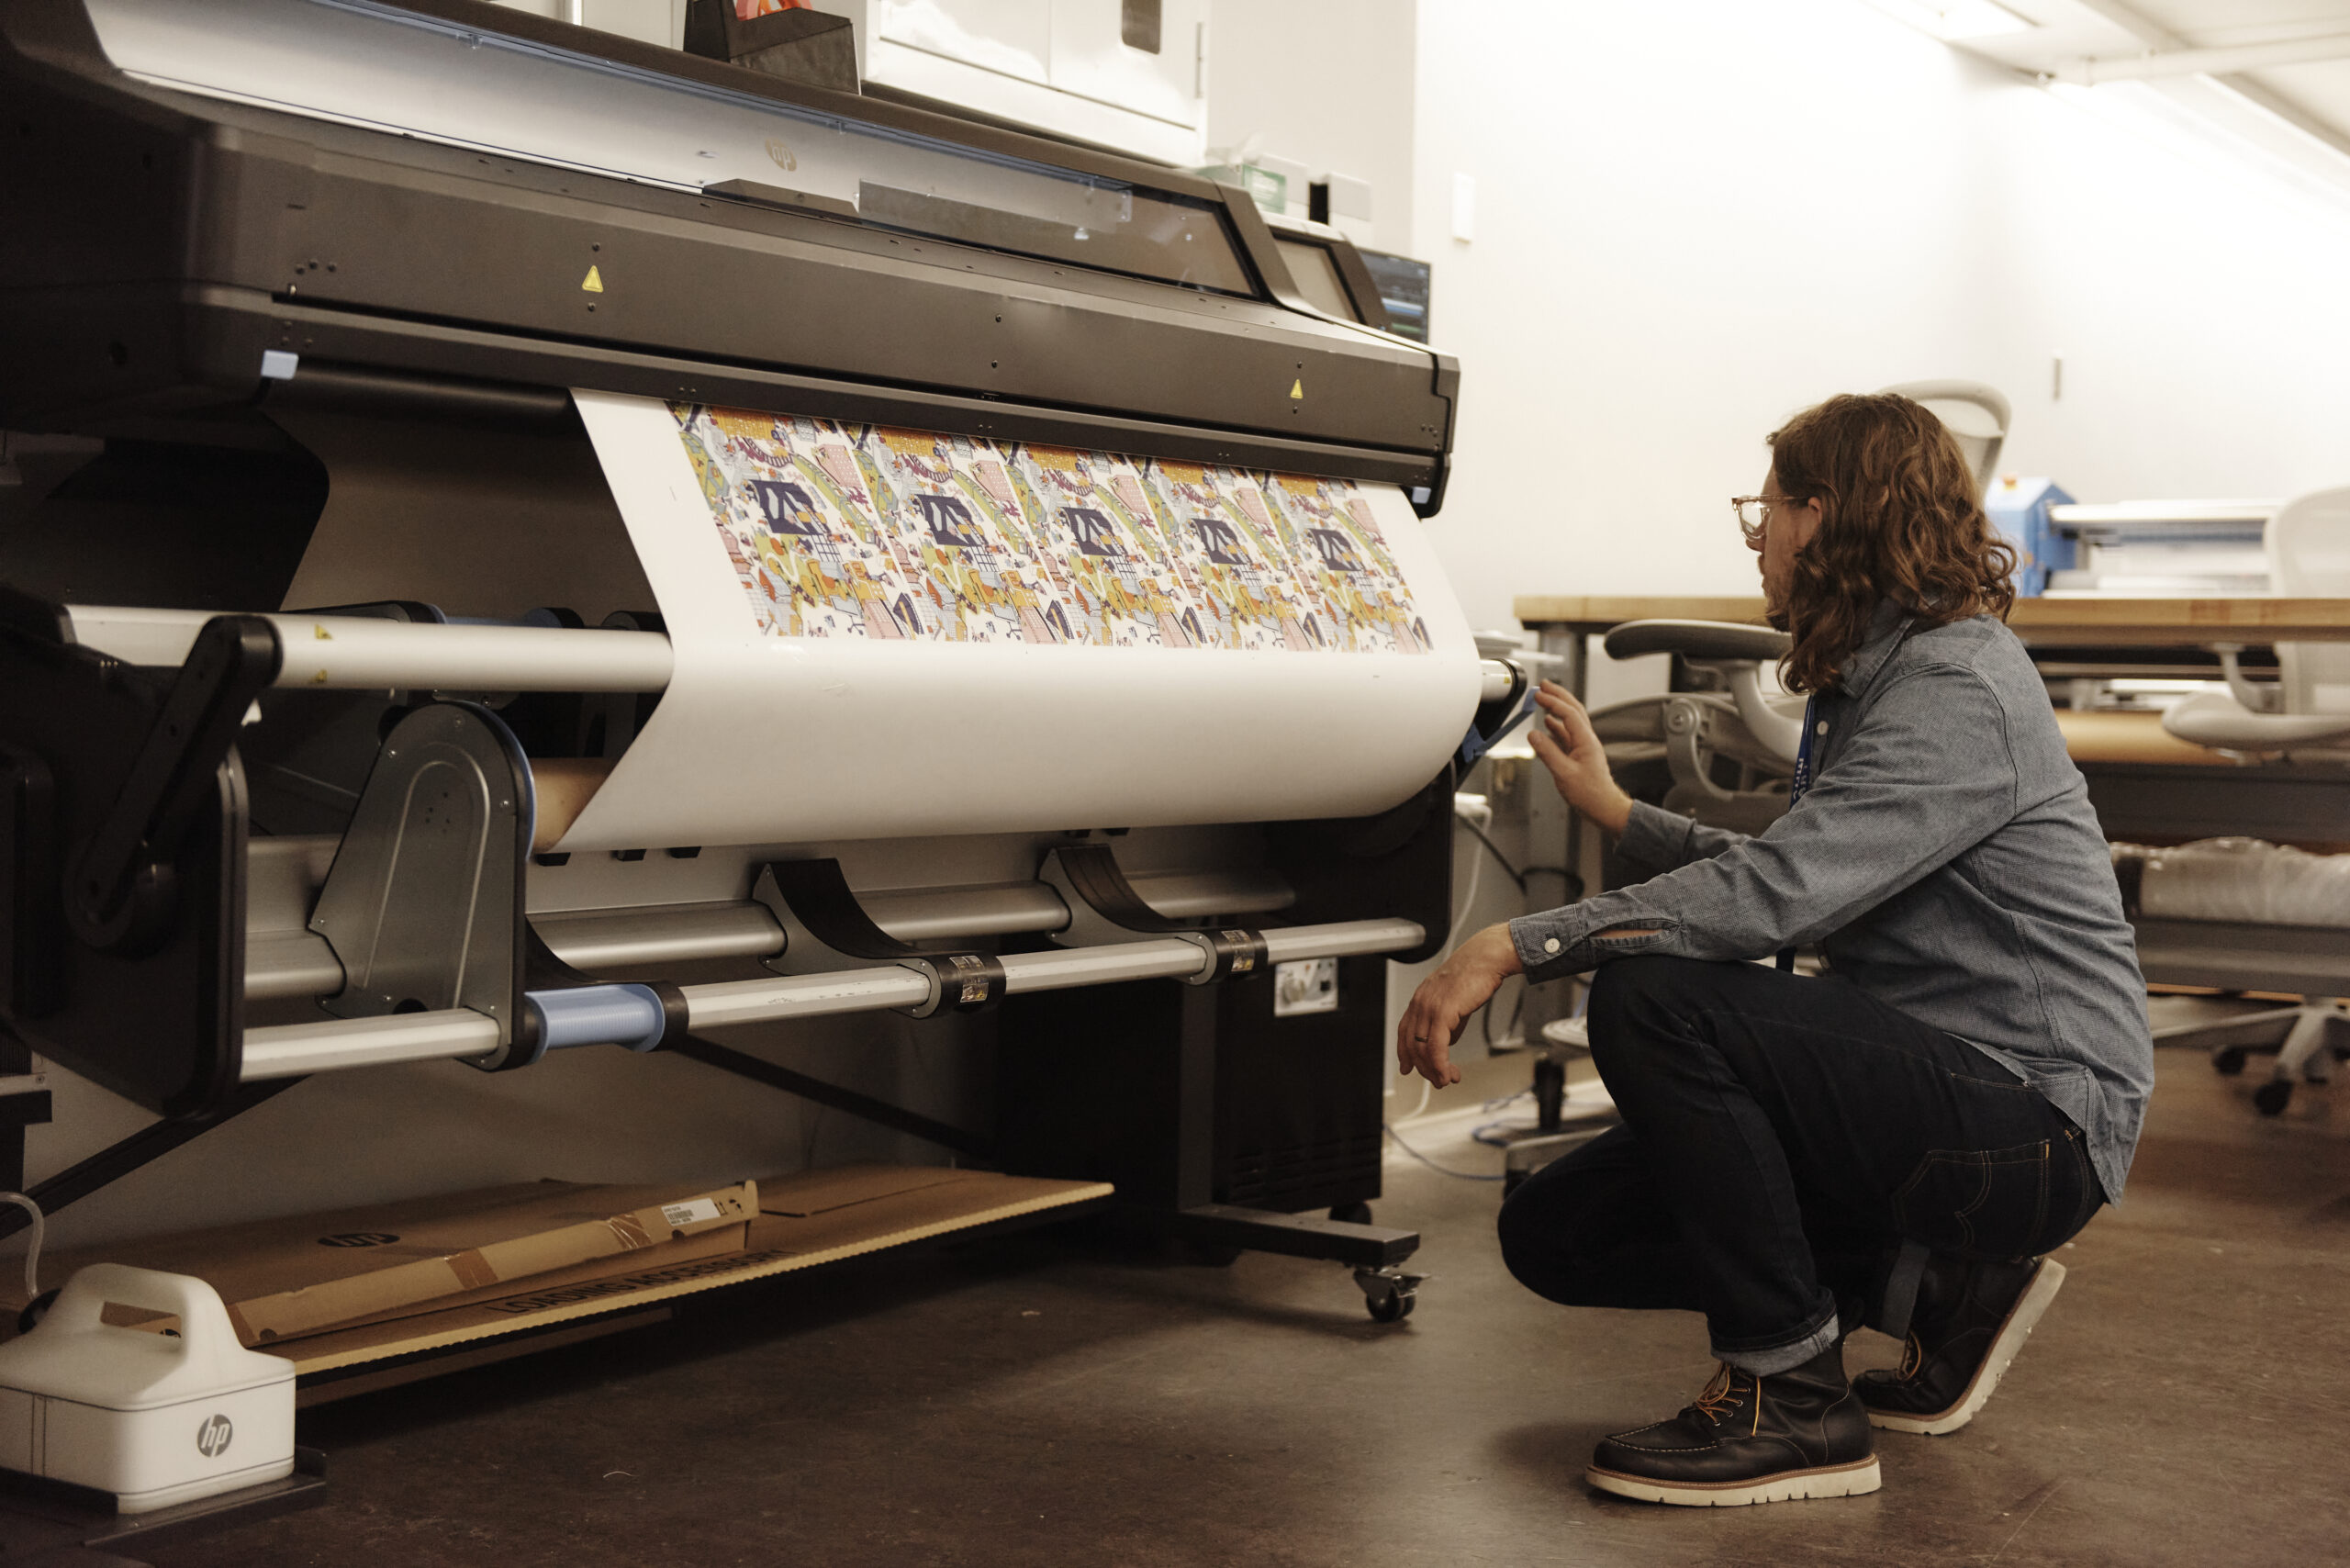 A staff person squatting in front of a wide roll printer in the lab.